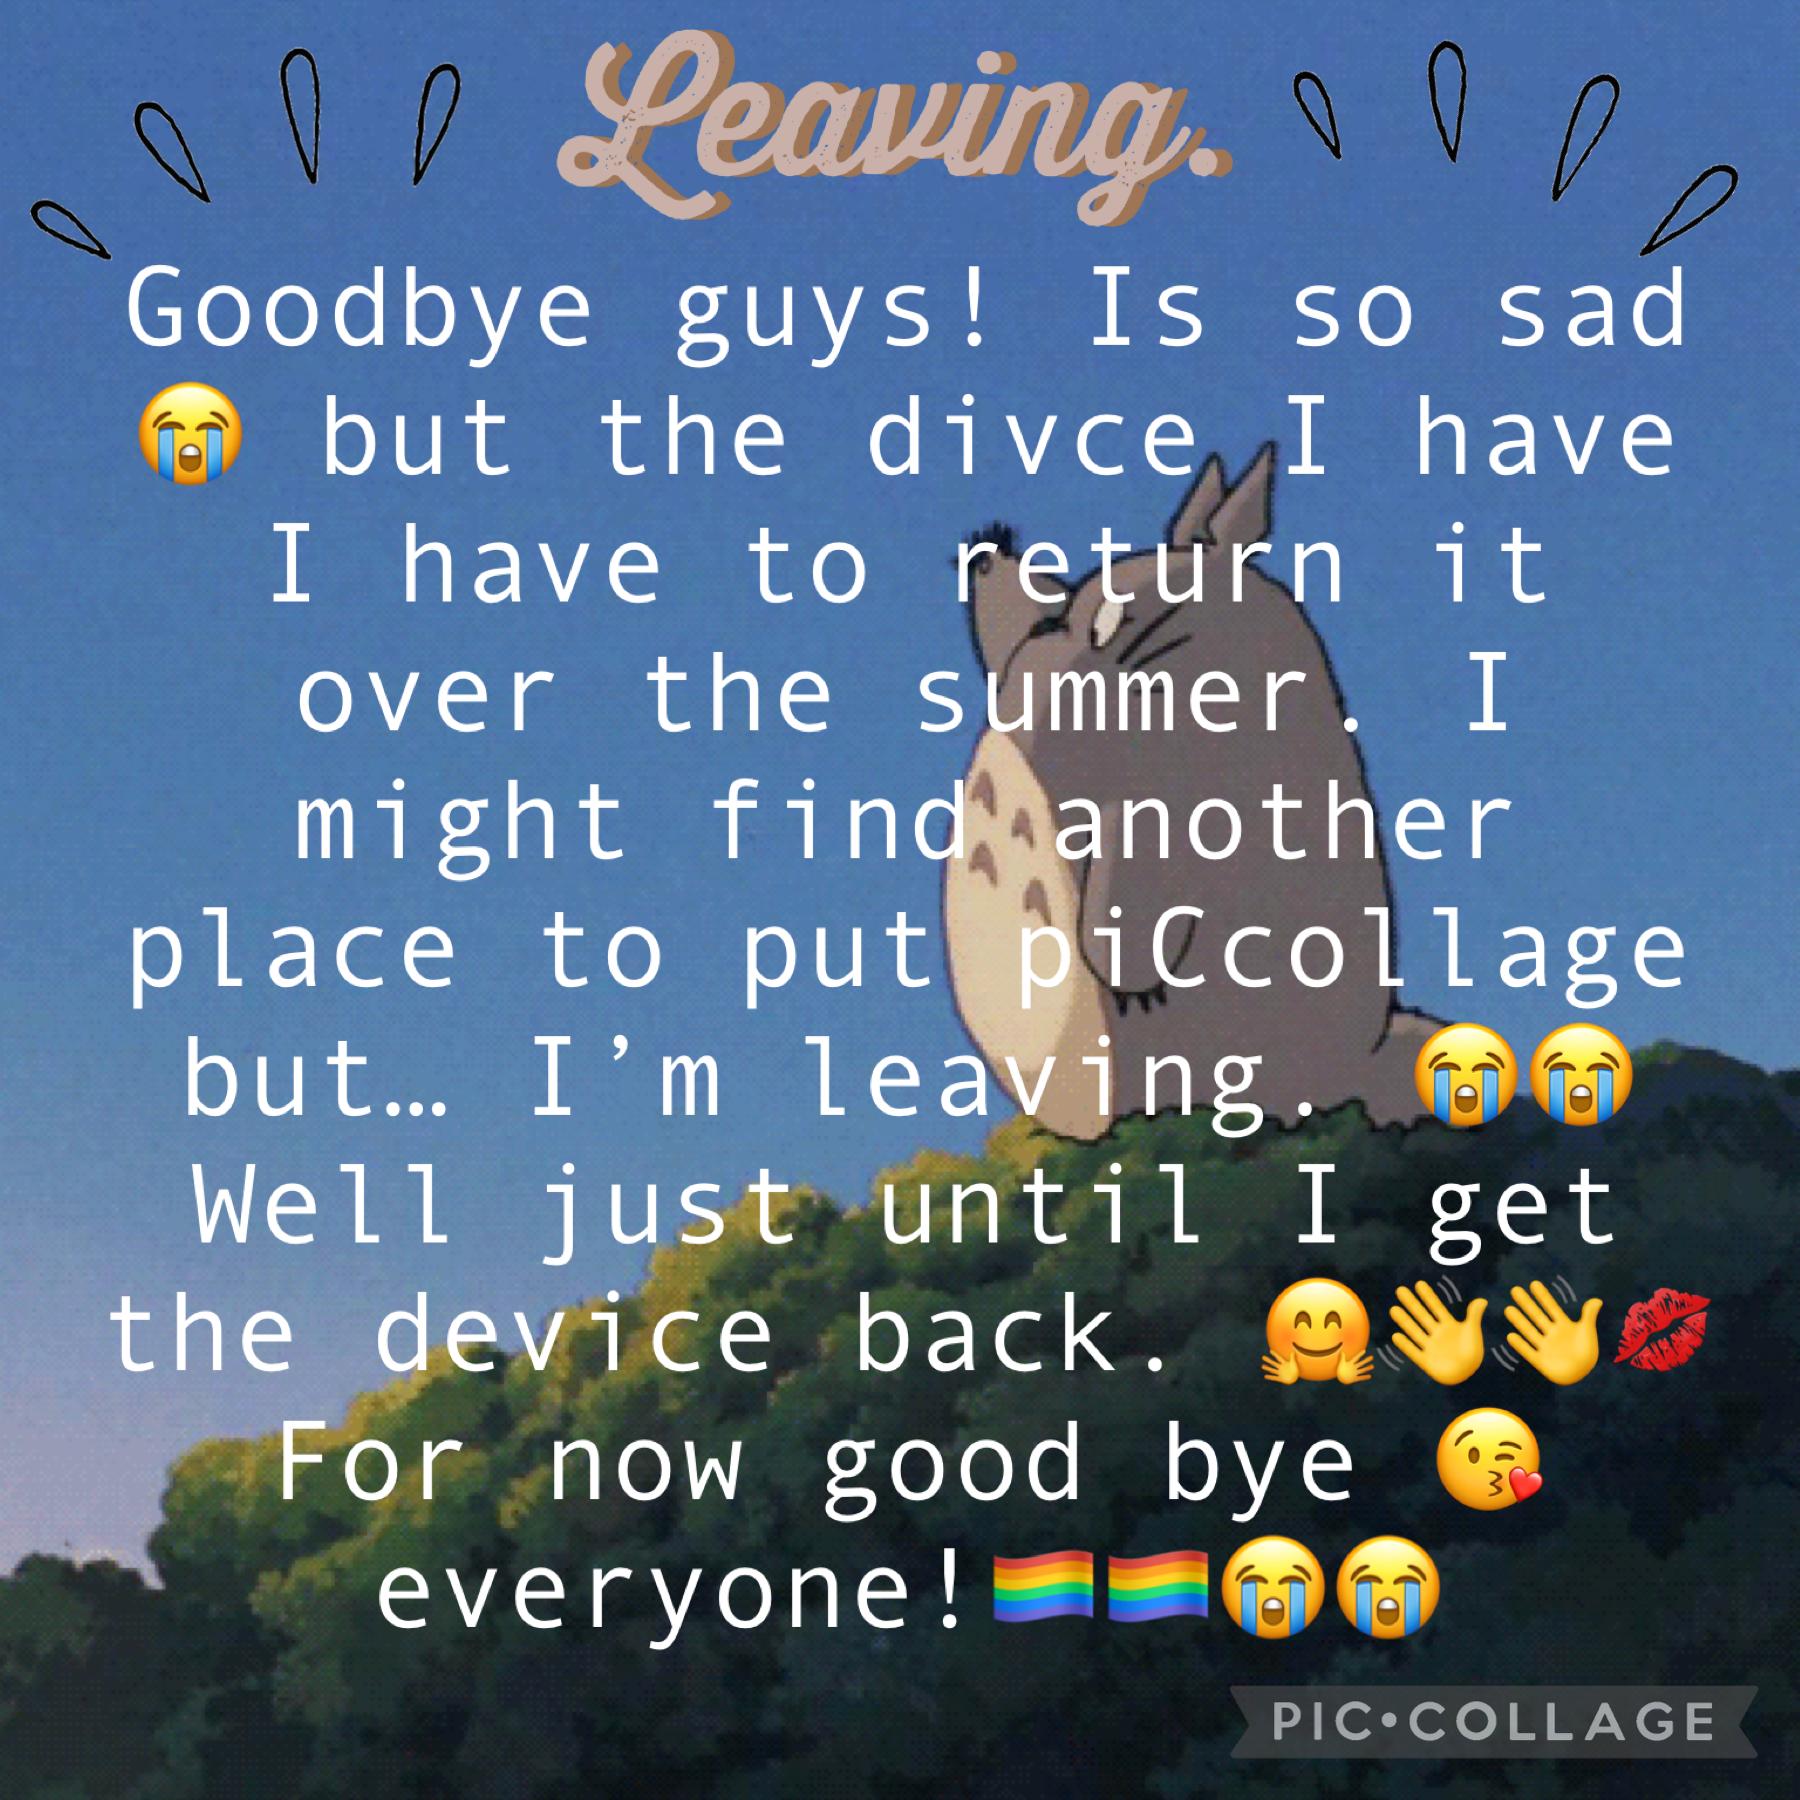 Not for good but that’s why I said goodbye in my last collage!😭😭😭😭🏳️‍🌈🏳️‍🌈🏳️‍🌈 